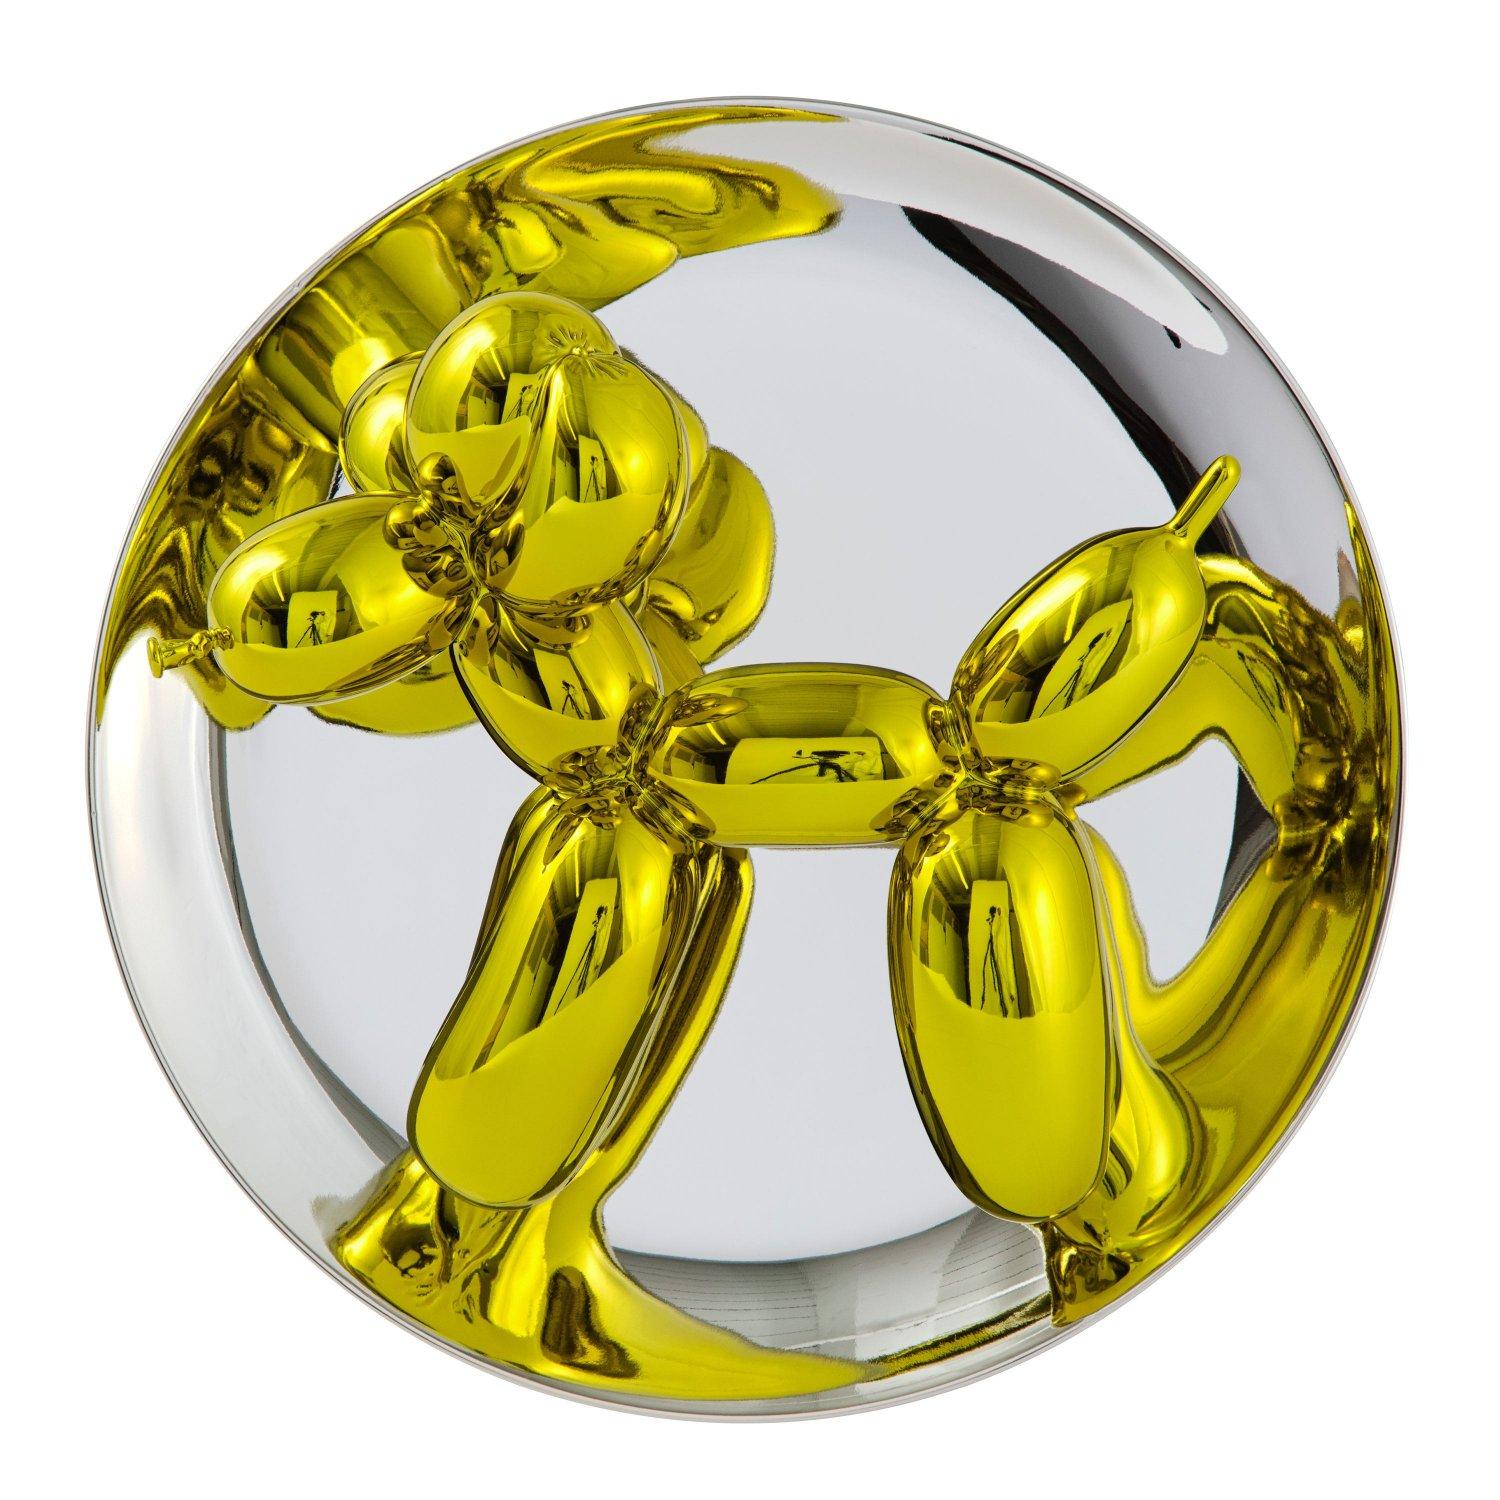 Balloon Dog (Yellow) - Jeff Koons, Contemporary, 21st Century, Sculpture, Decor, Limited Edition

Limoges porcelain with chromatic metalized coating
Edition of 2300
Signed and numbered
In mint condition, as acquired from the manufacturer
In the